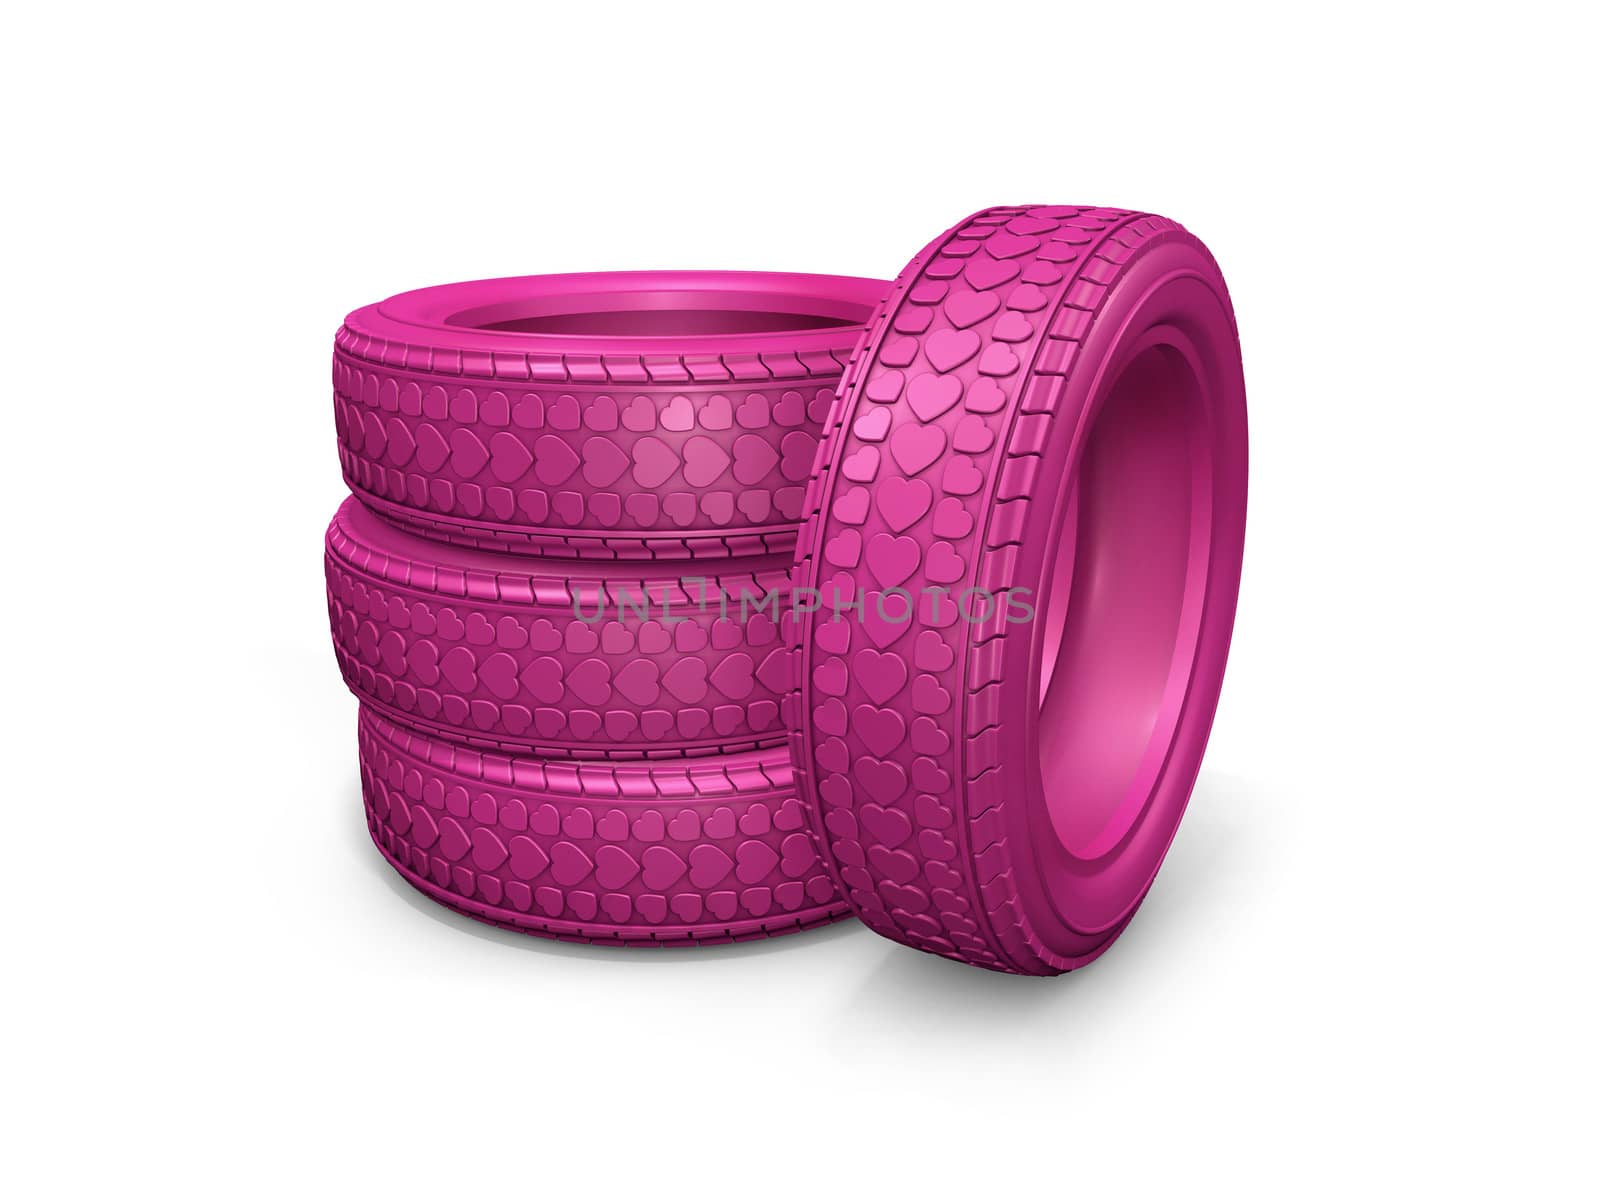 Group of pink tires isolated on white background by Polakx